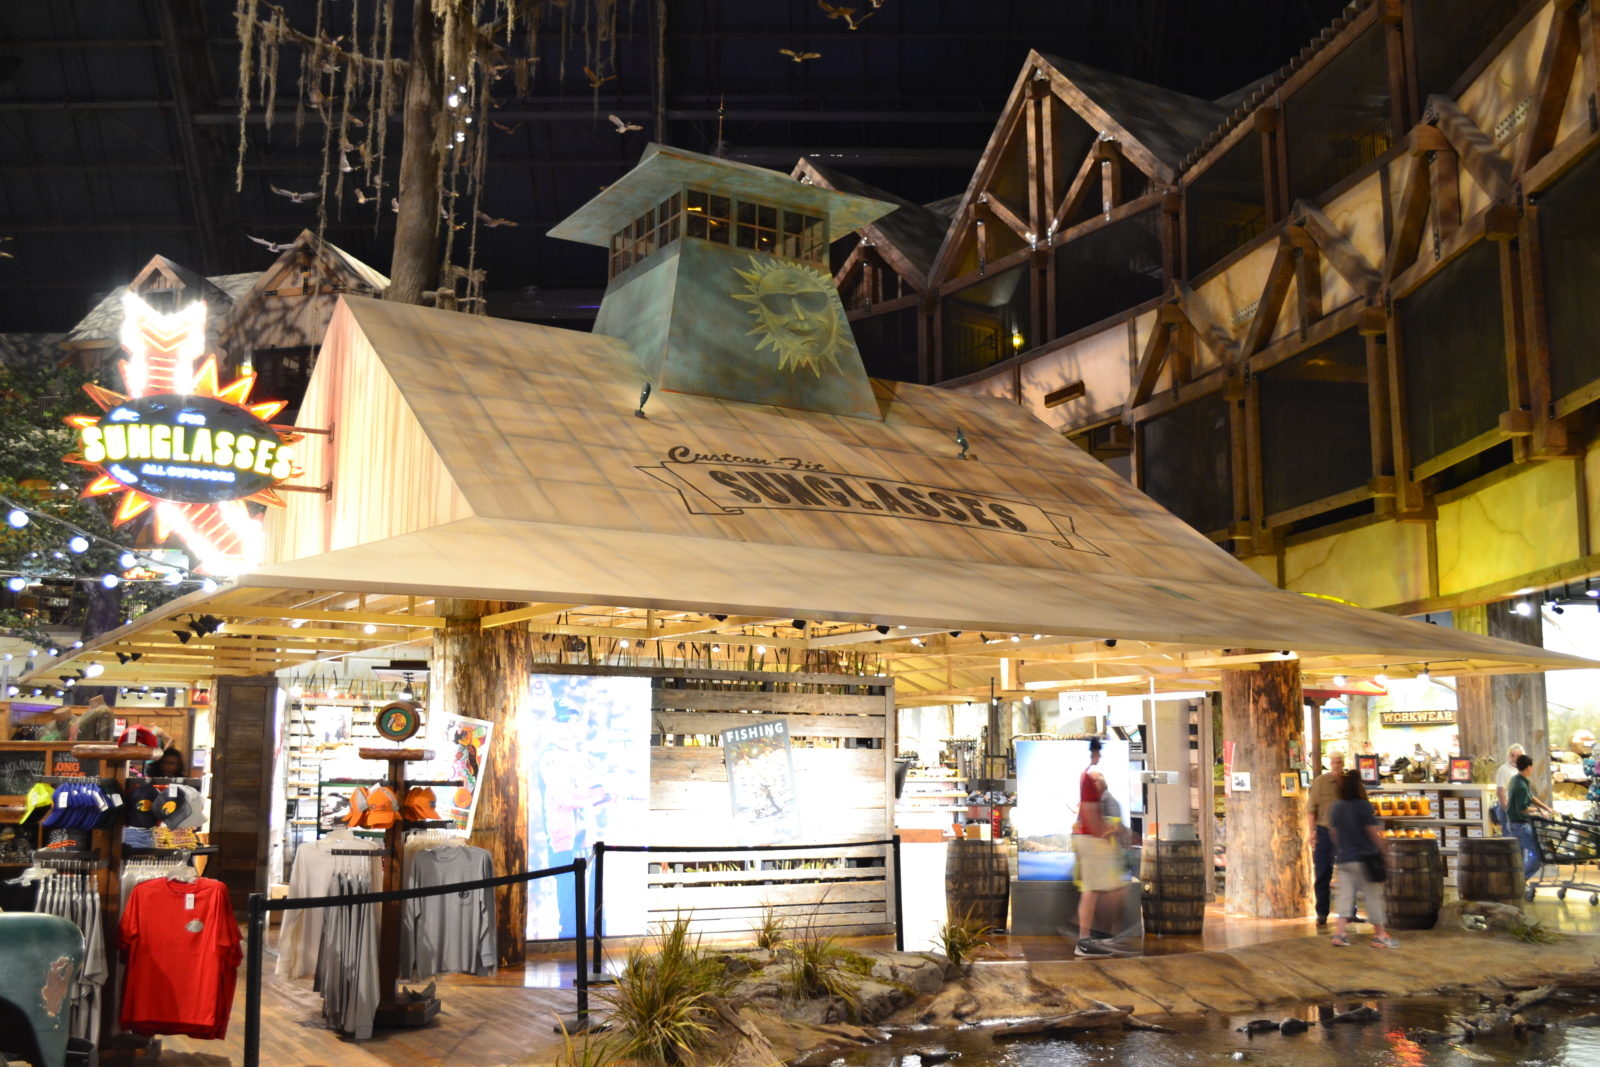 Bass Pro Shop Custom Commercial Interior Canopy Structure